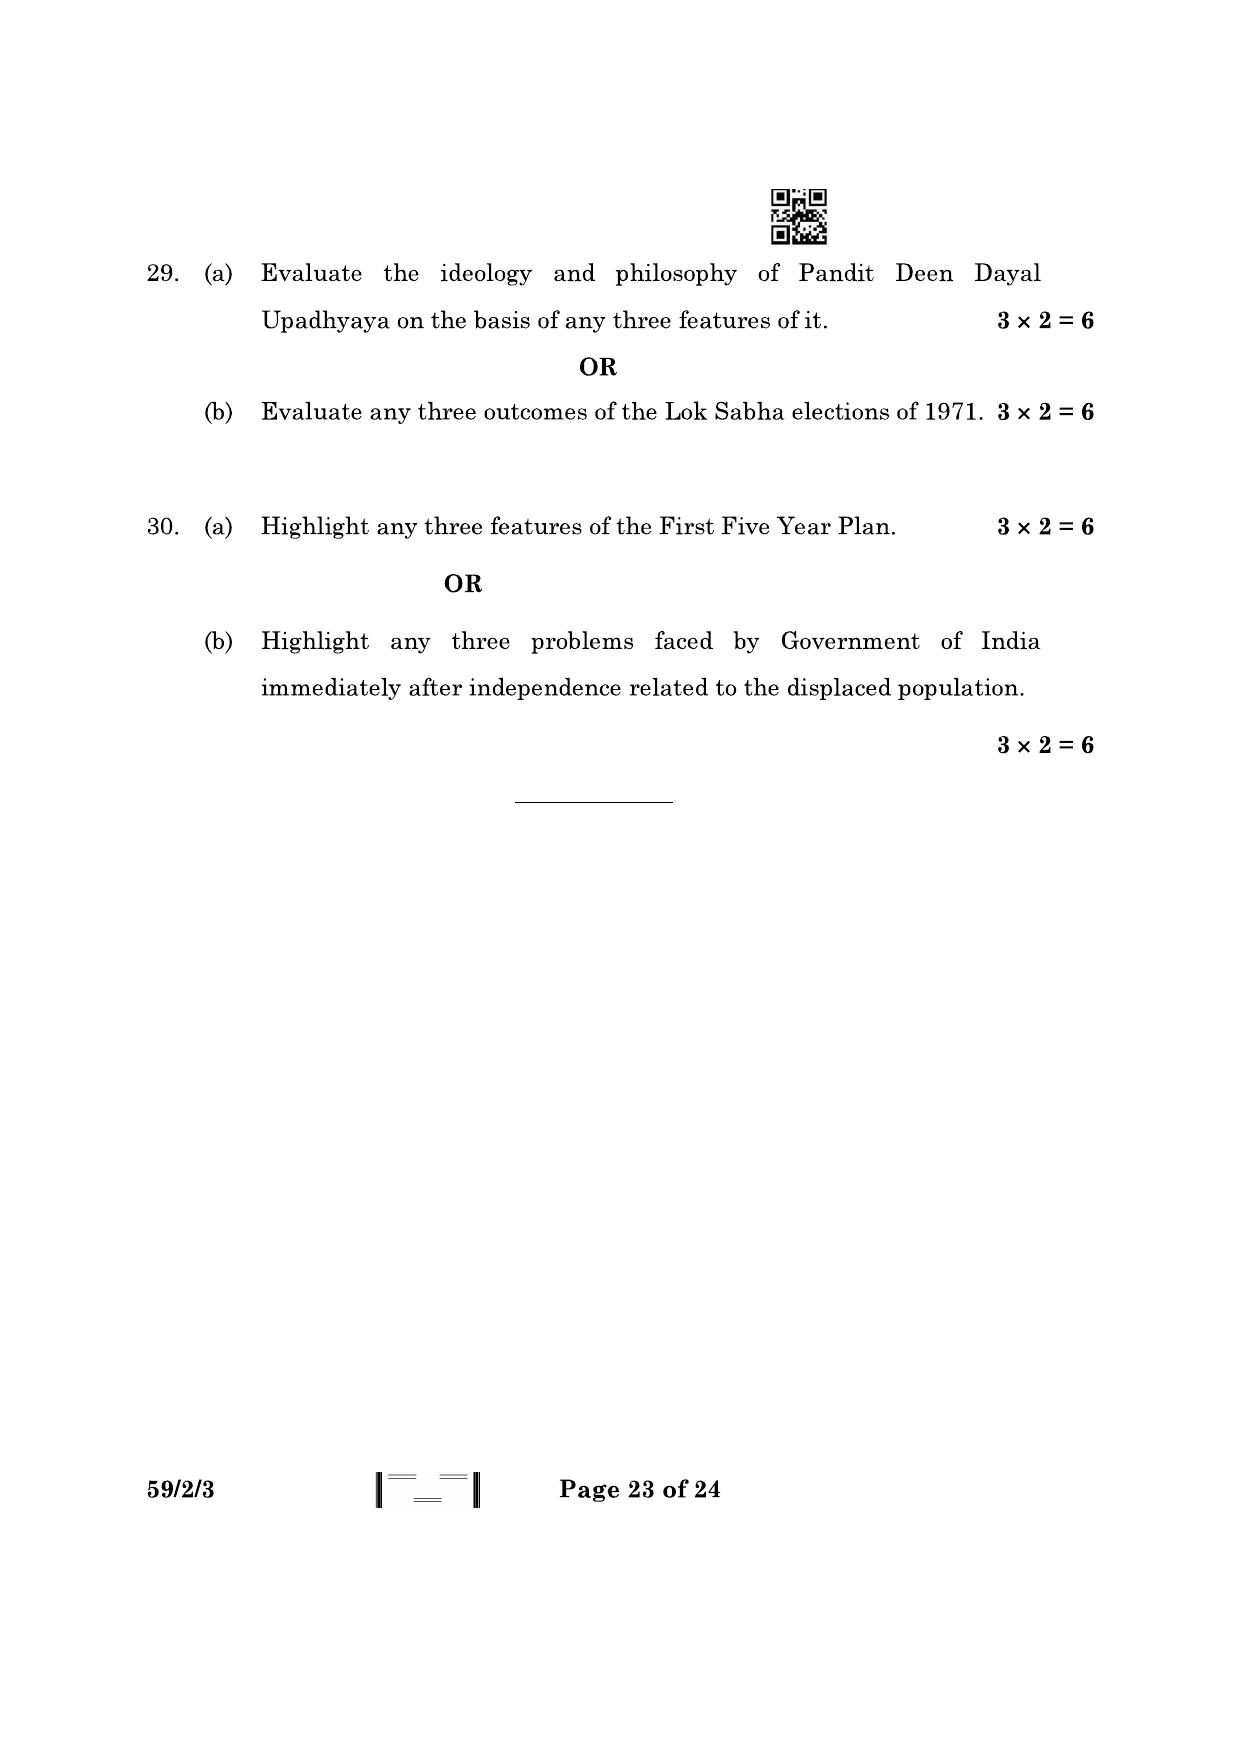 CBSE Class 12 59-2-3 Political Science 2023 Question Paper - Page 23